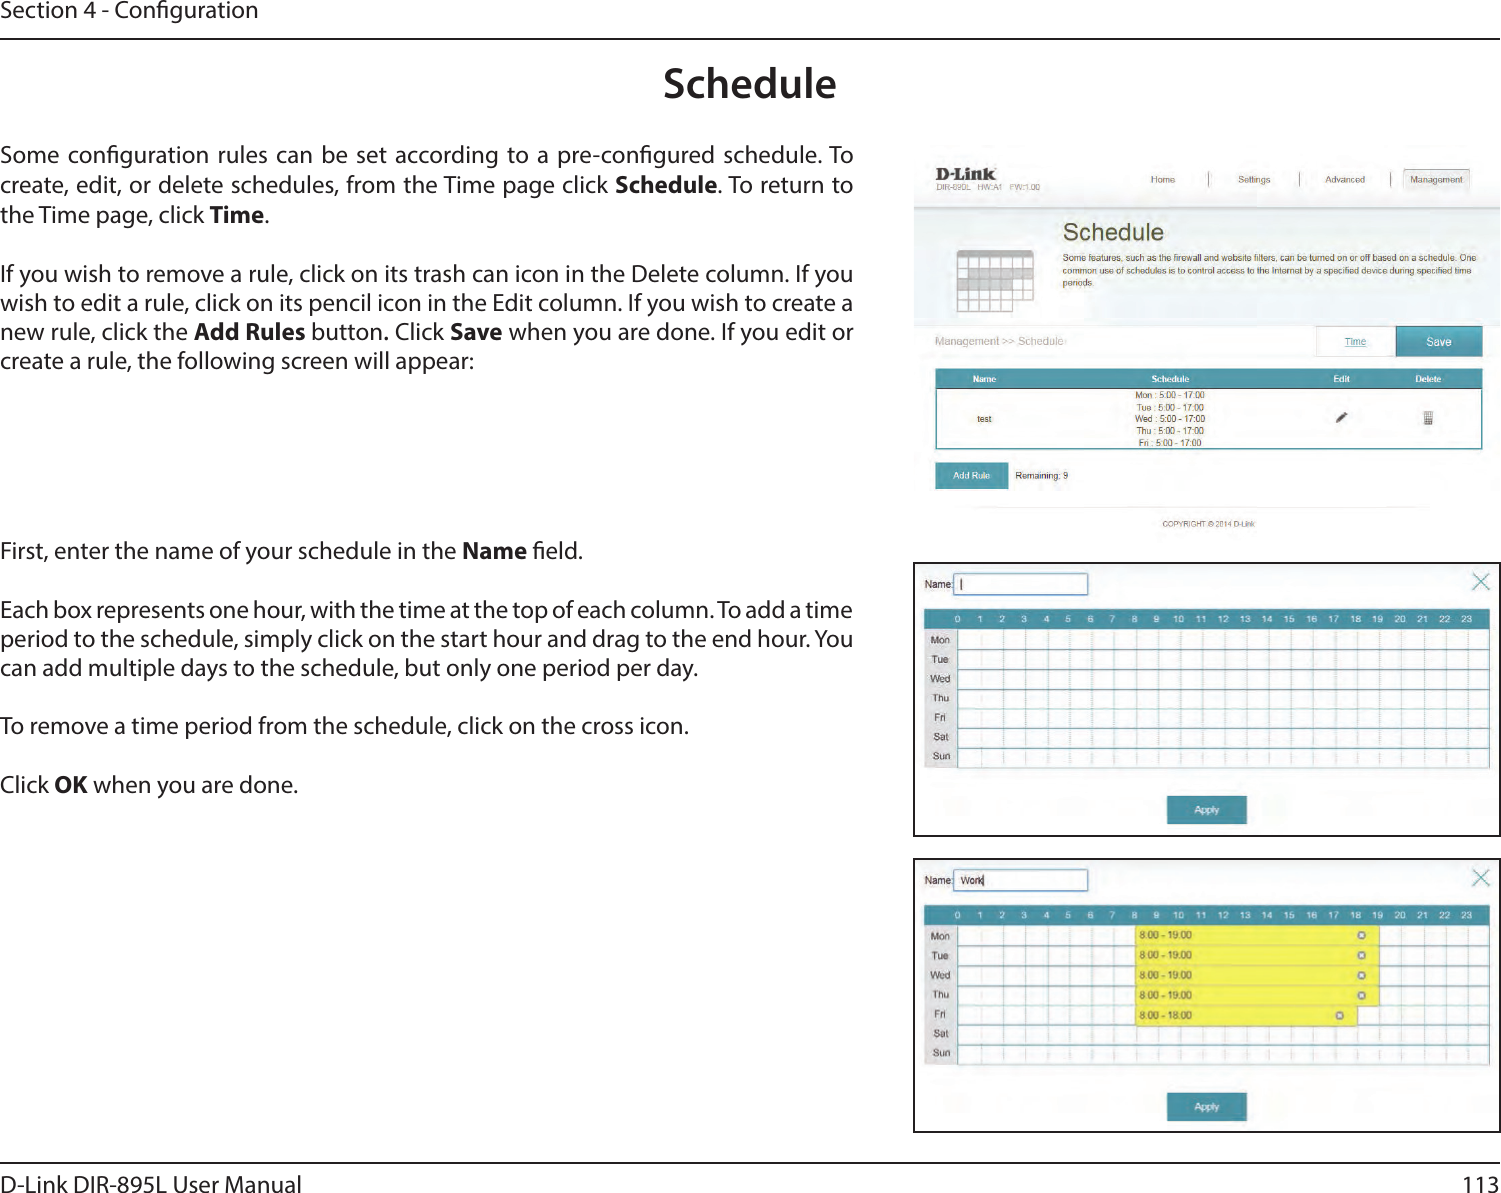 113D-Link DIR-895L User ManualSection 4 - CongurationScheduleSome conguration rules can be set according to a pre-congured schedule. To create, edit, or delete schedules, from the Time page click Schedule. To return to the Time page, click Time. If you wish to remove a rule, click on its trash can icon in the Delete column. If you wish to edit a rule, click on its pencil icon in the Edit column. If you wish to create a new rule, click the Add Rules button. Click Save when you are done. If you edit or create a rule, the following screen will appear:First, enter the name of your schedule in the Name eld.Each box represents one hour, with the time at the top of each column. To add a time period to the schedule, simply click on the start hour and drag to the end hour. You can add multiple days to the schedule, but only one period per day.To remove a time period from the schedule, click on the cross icon.Click OK when you are done.